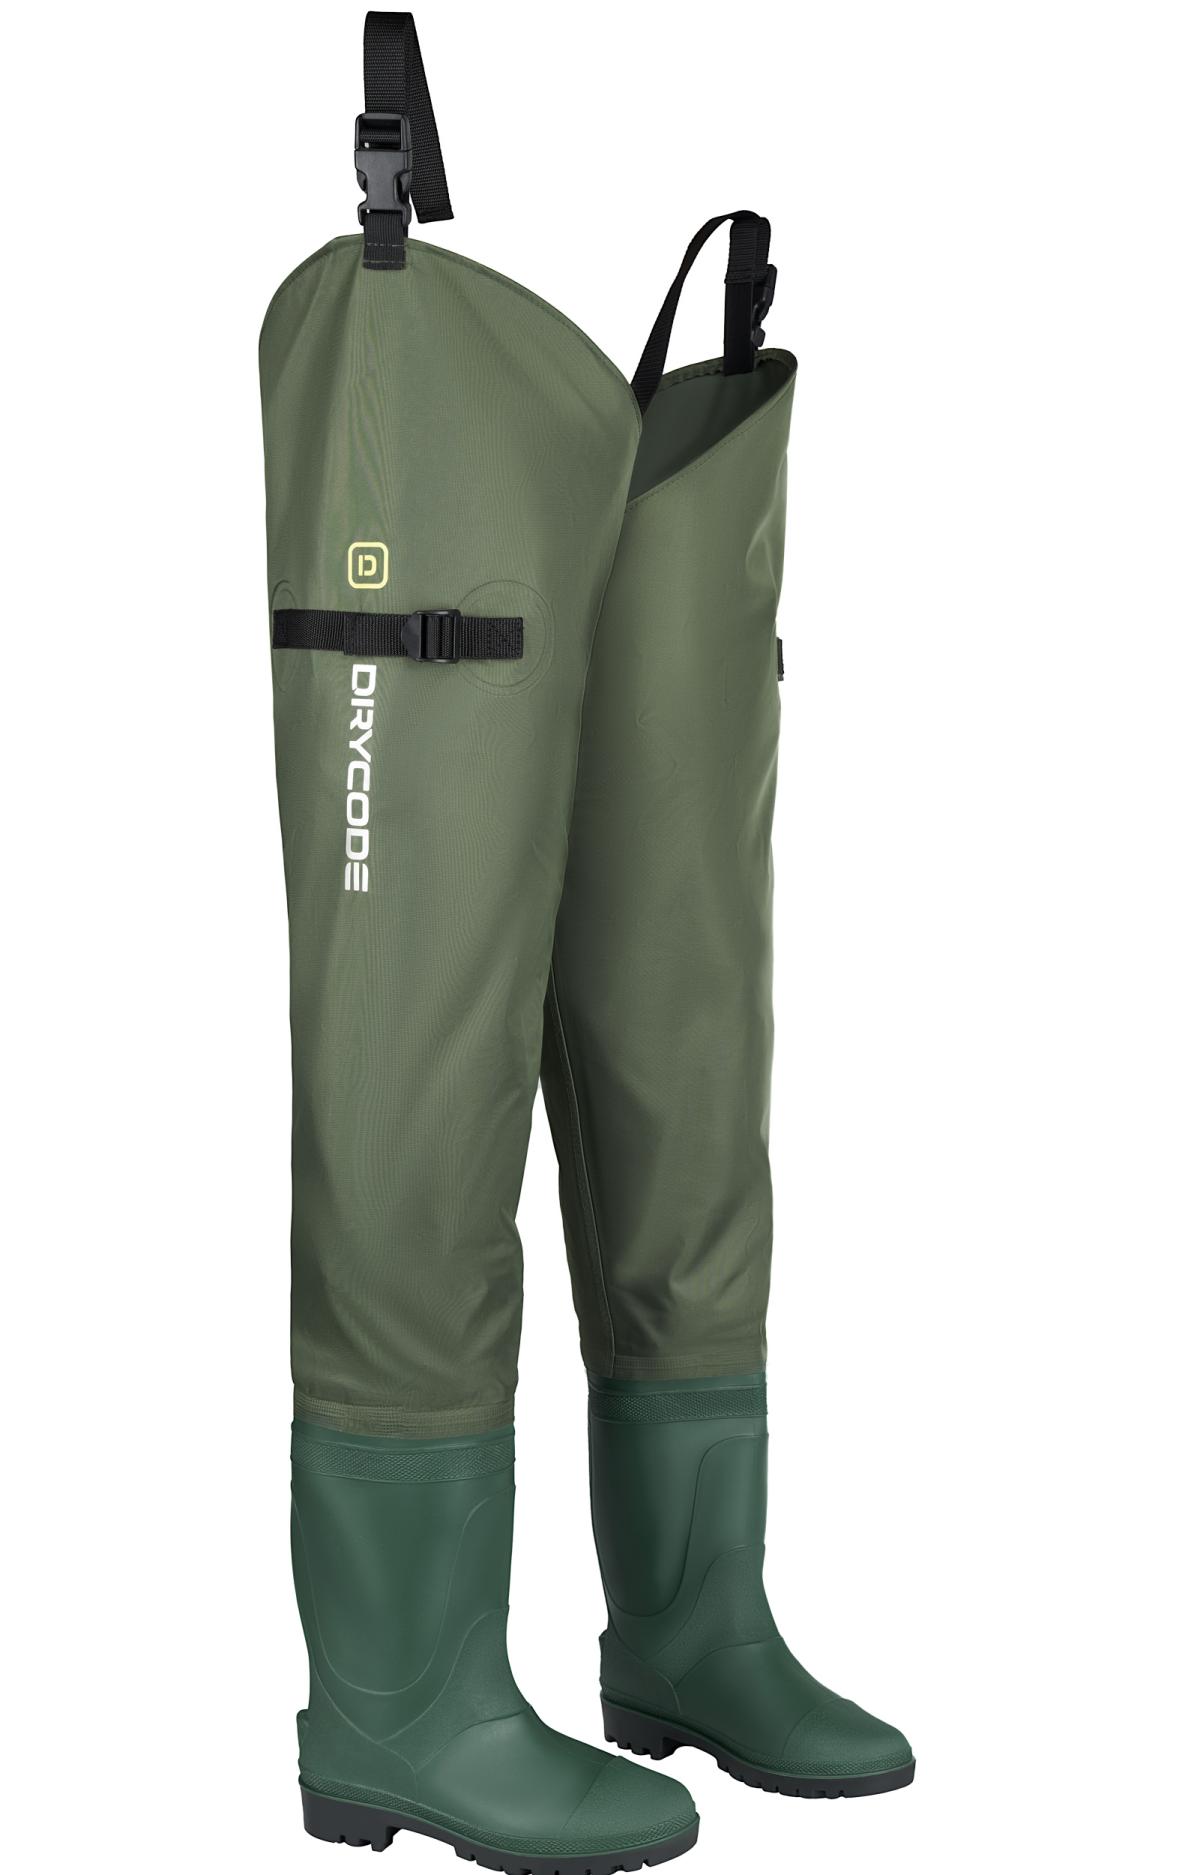 DRYCODE Waders for Men with Boots, Waterproof Neoprene Chest Waders for  Women, Duck Hunting/Fishing Waders